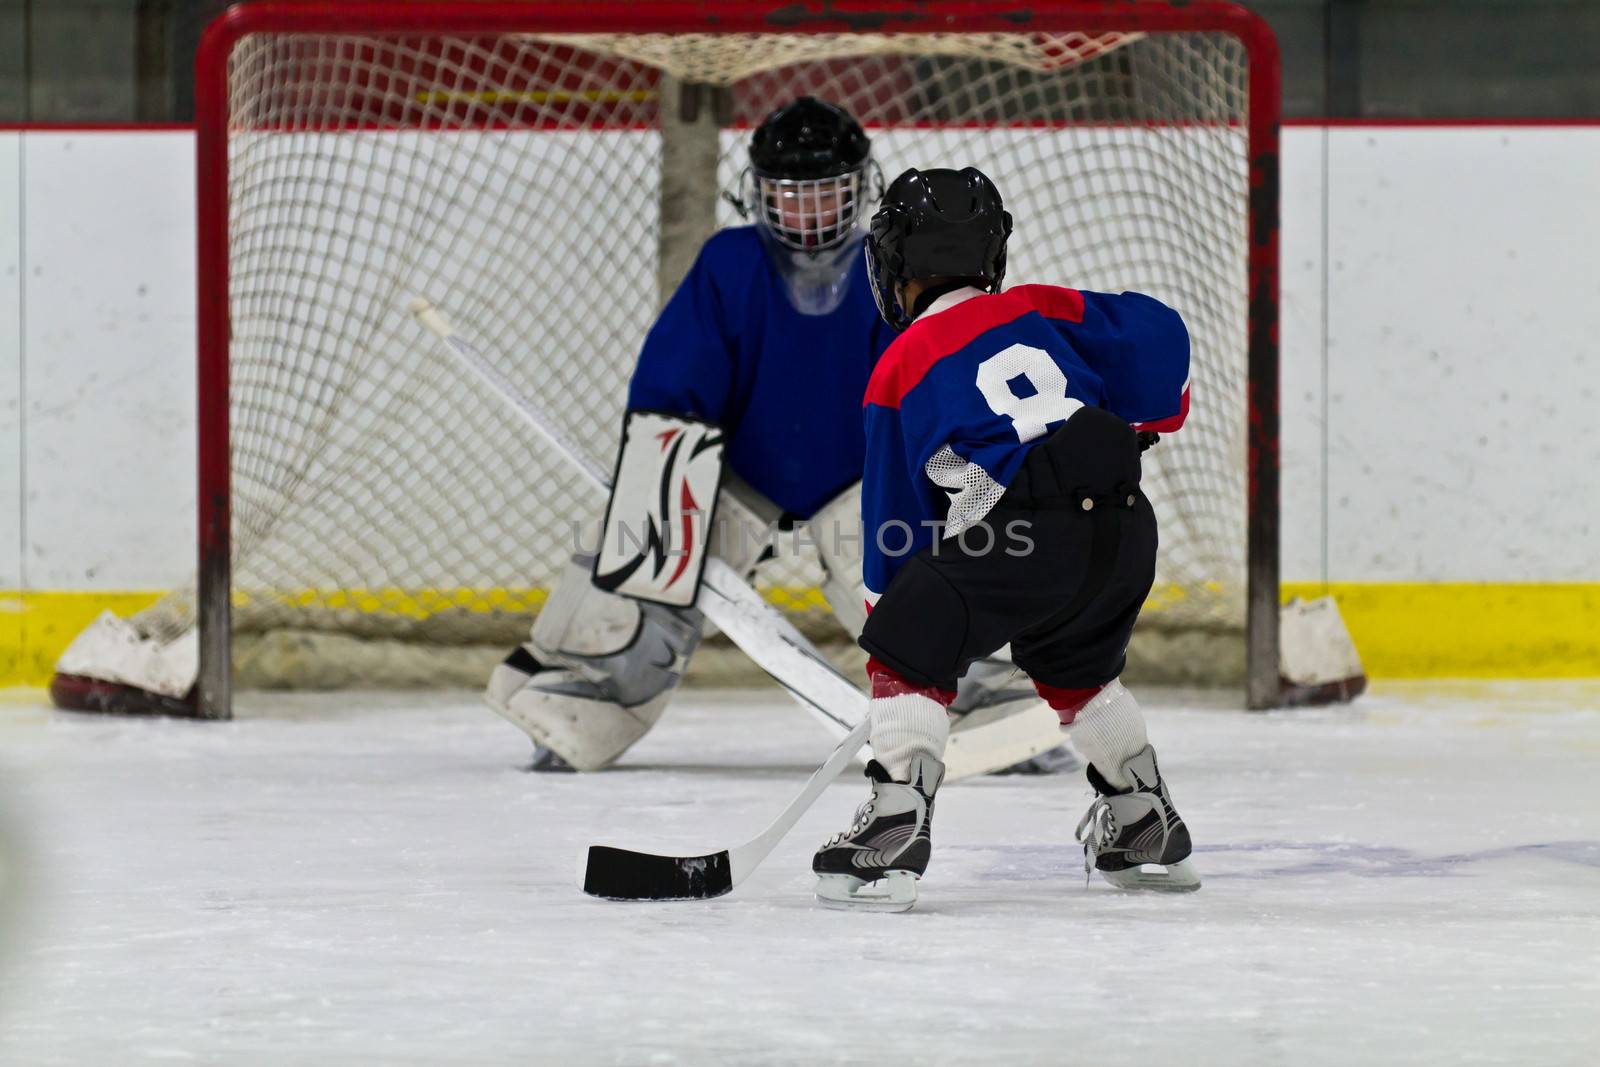 Young ice hockey player prepares to shoot on net by bigjohn36